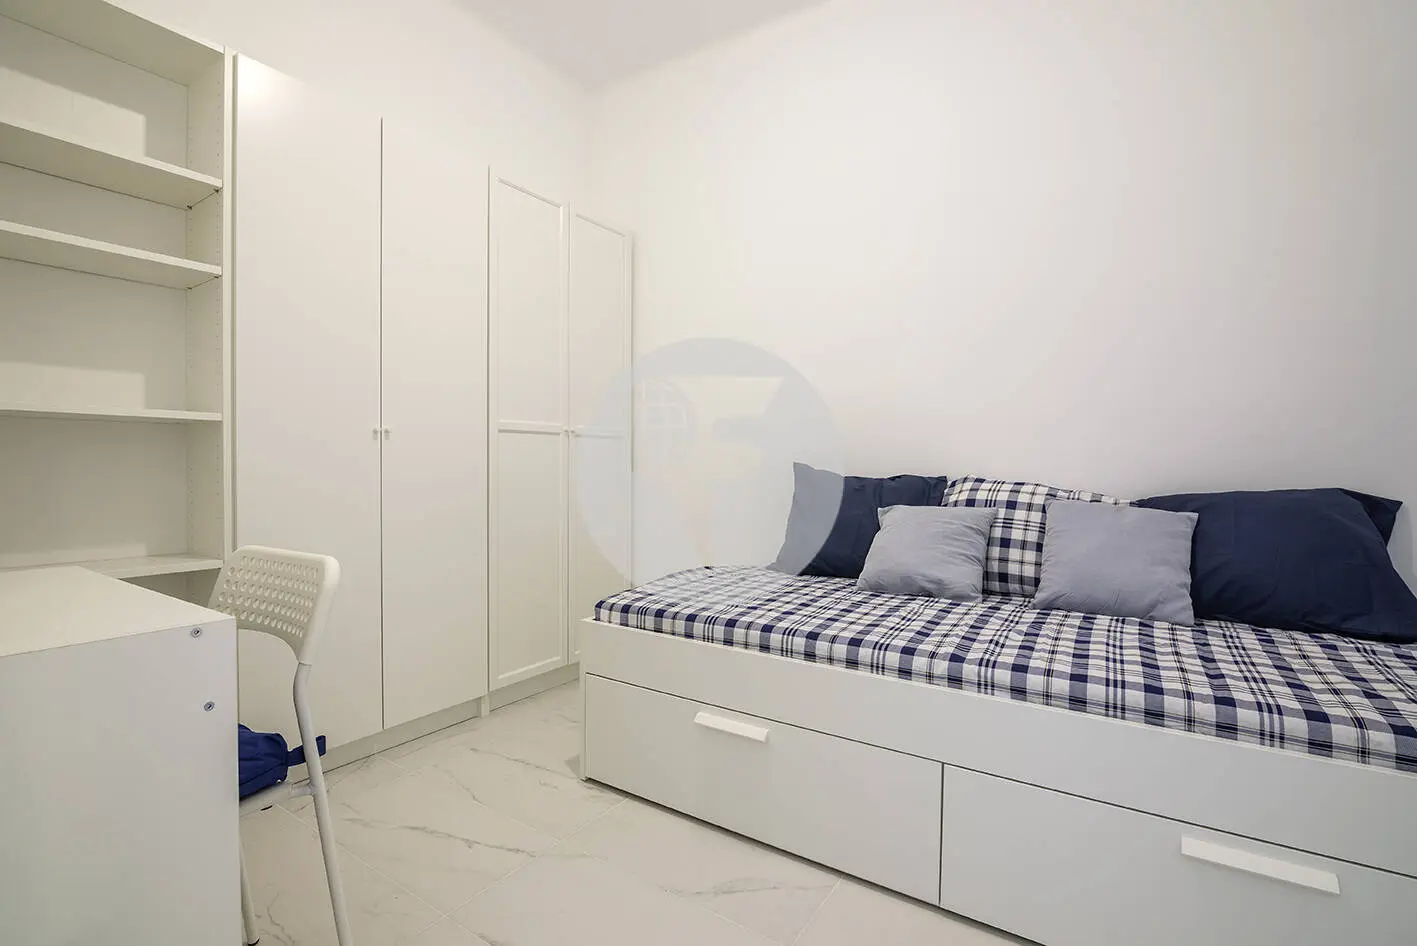 Brand new completely renovated apartment on Aragó street in the heart of El Clot in Barcelona. 37